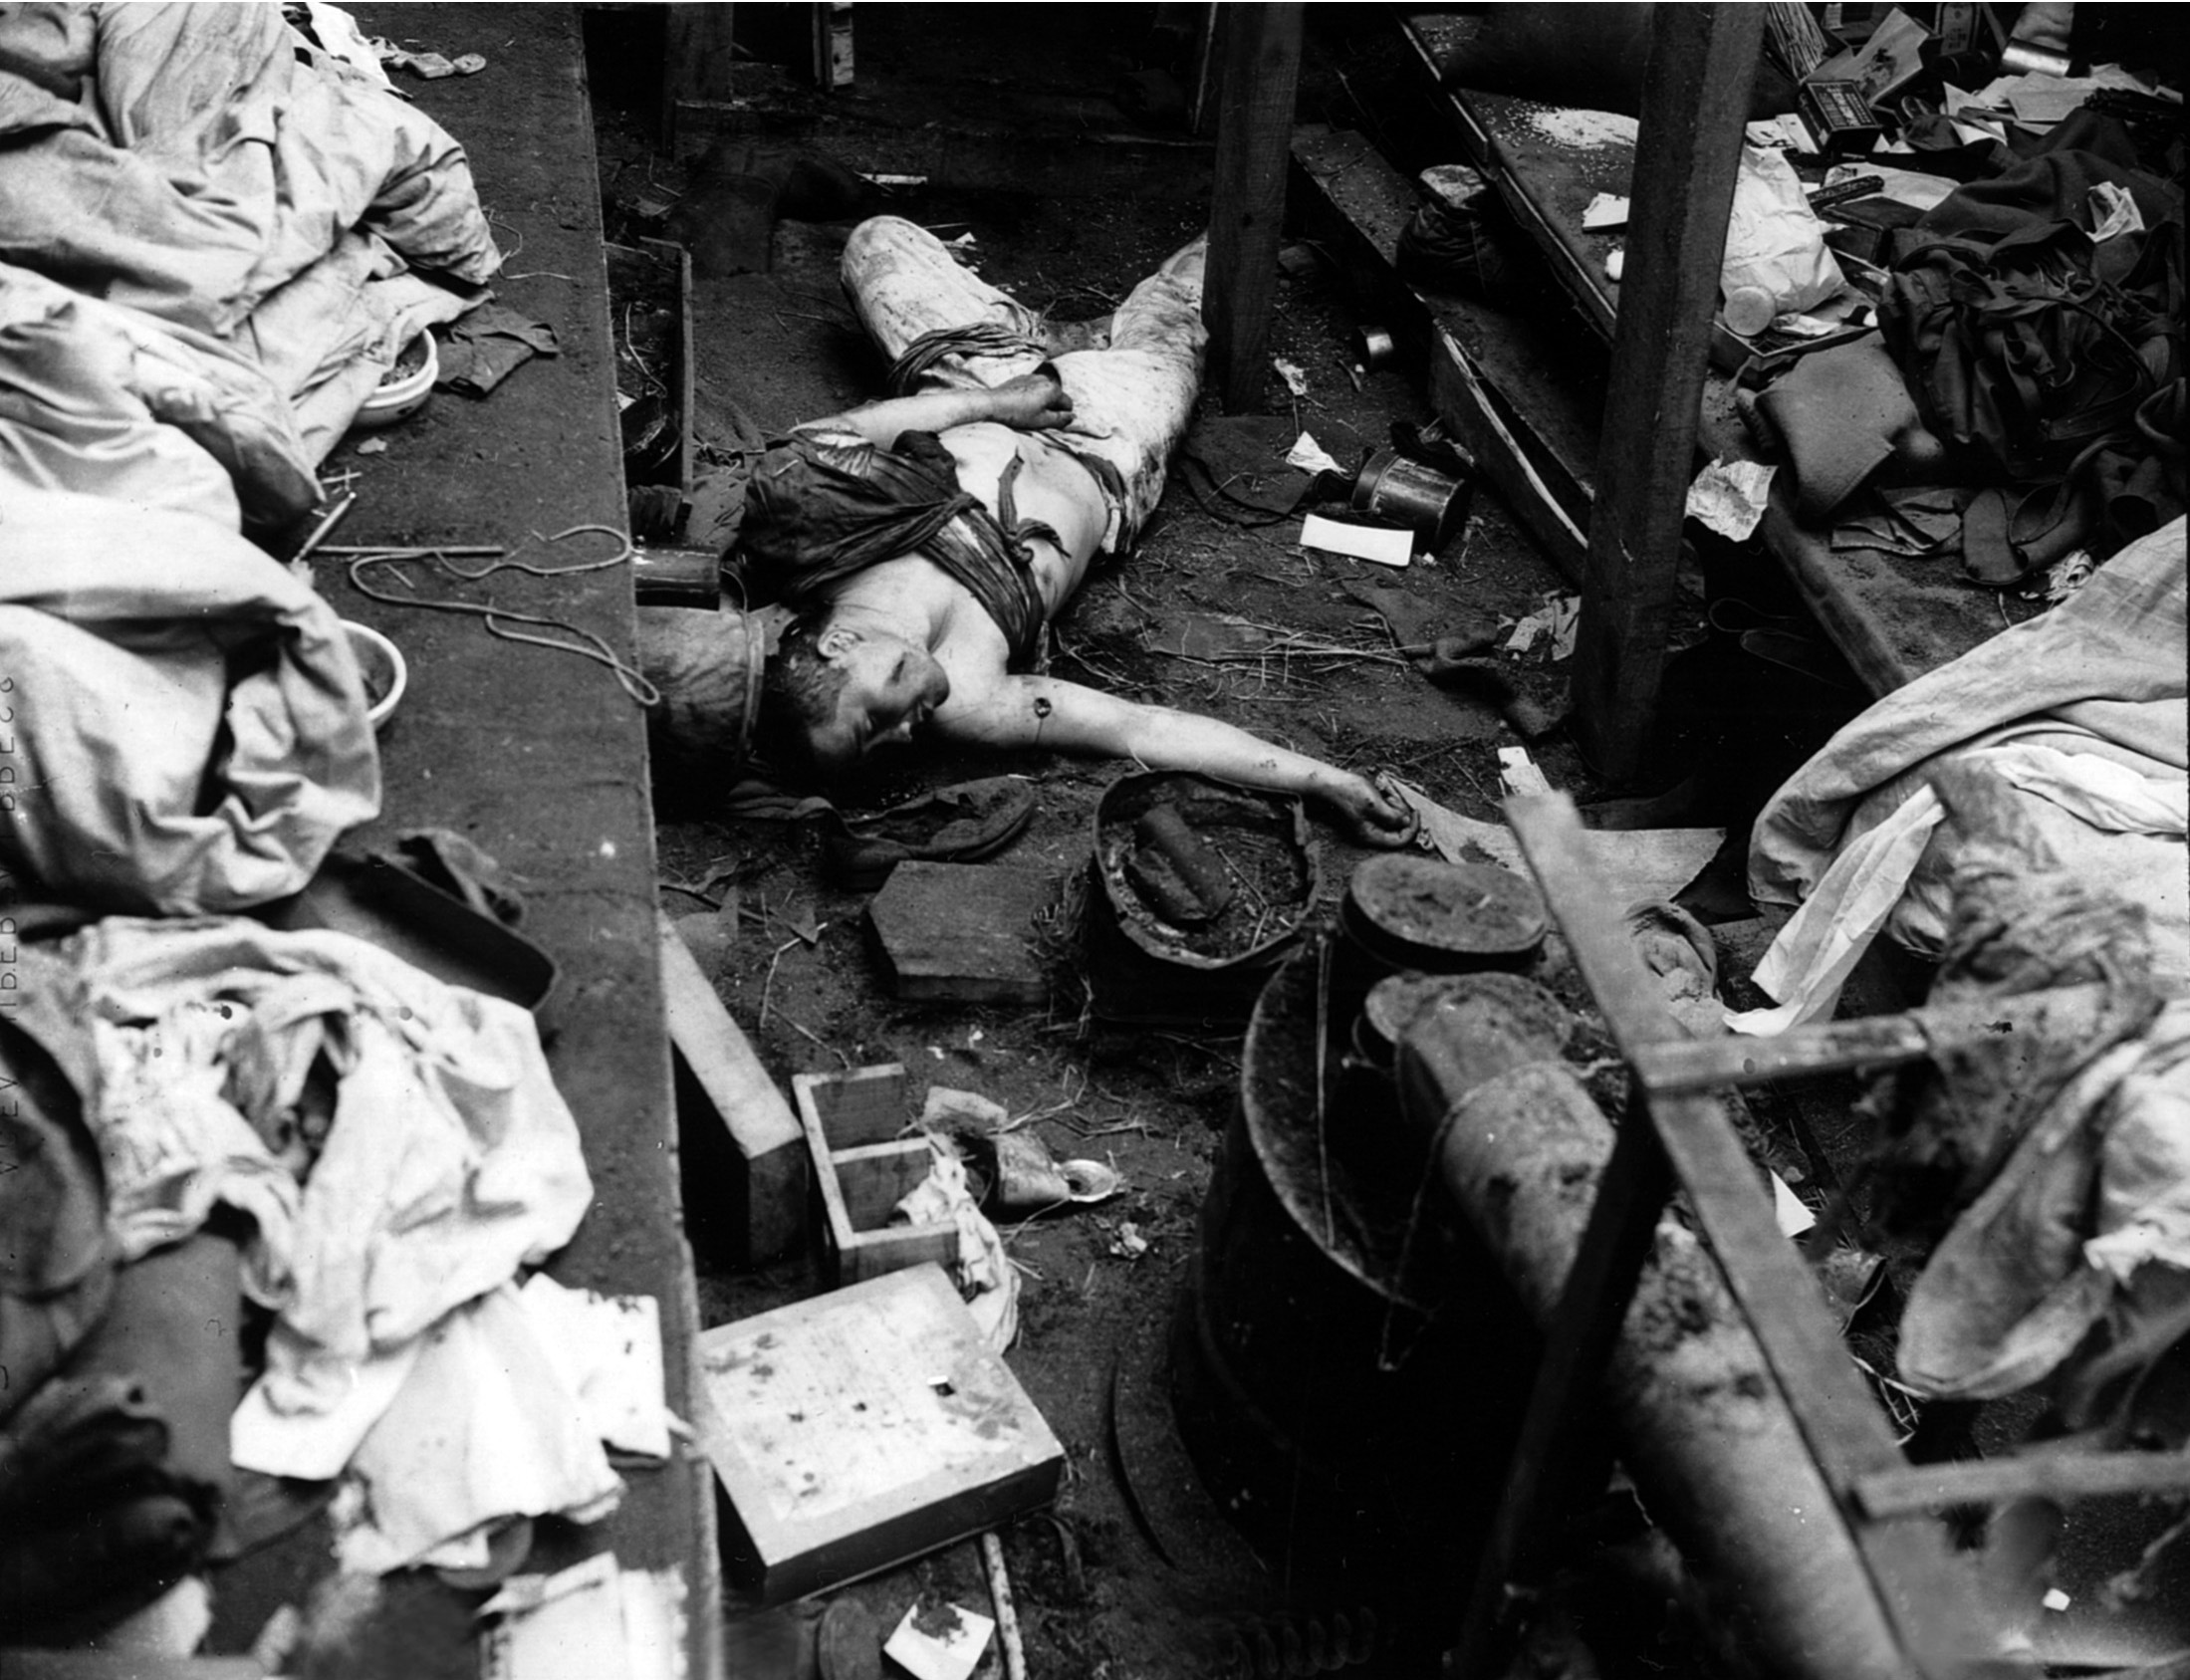 The body of a Japanese soldier who fought to the death lies sprawled on the floor of his bunker at Holtz Bay on the island of Attu. The soldier had been previously wounded as evidenced by old bandages.